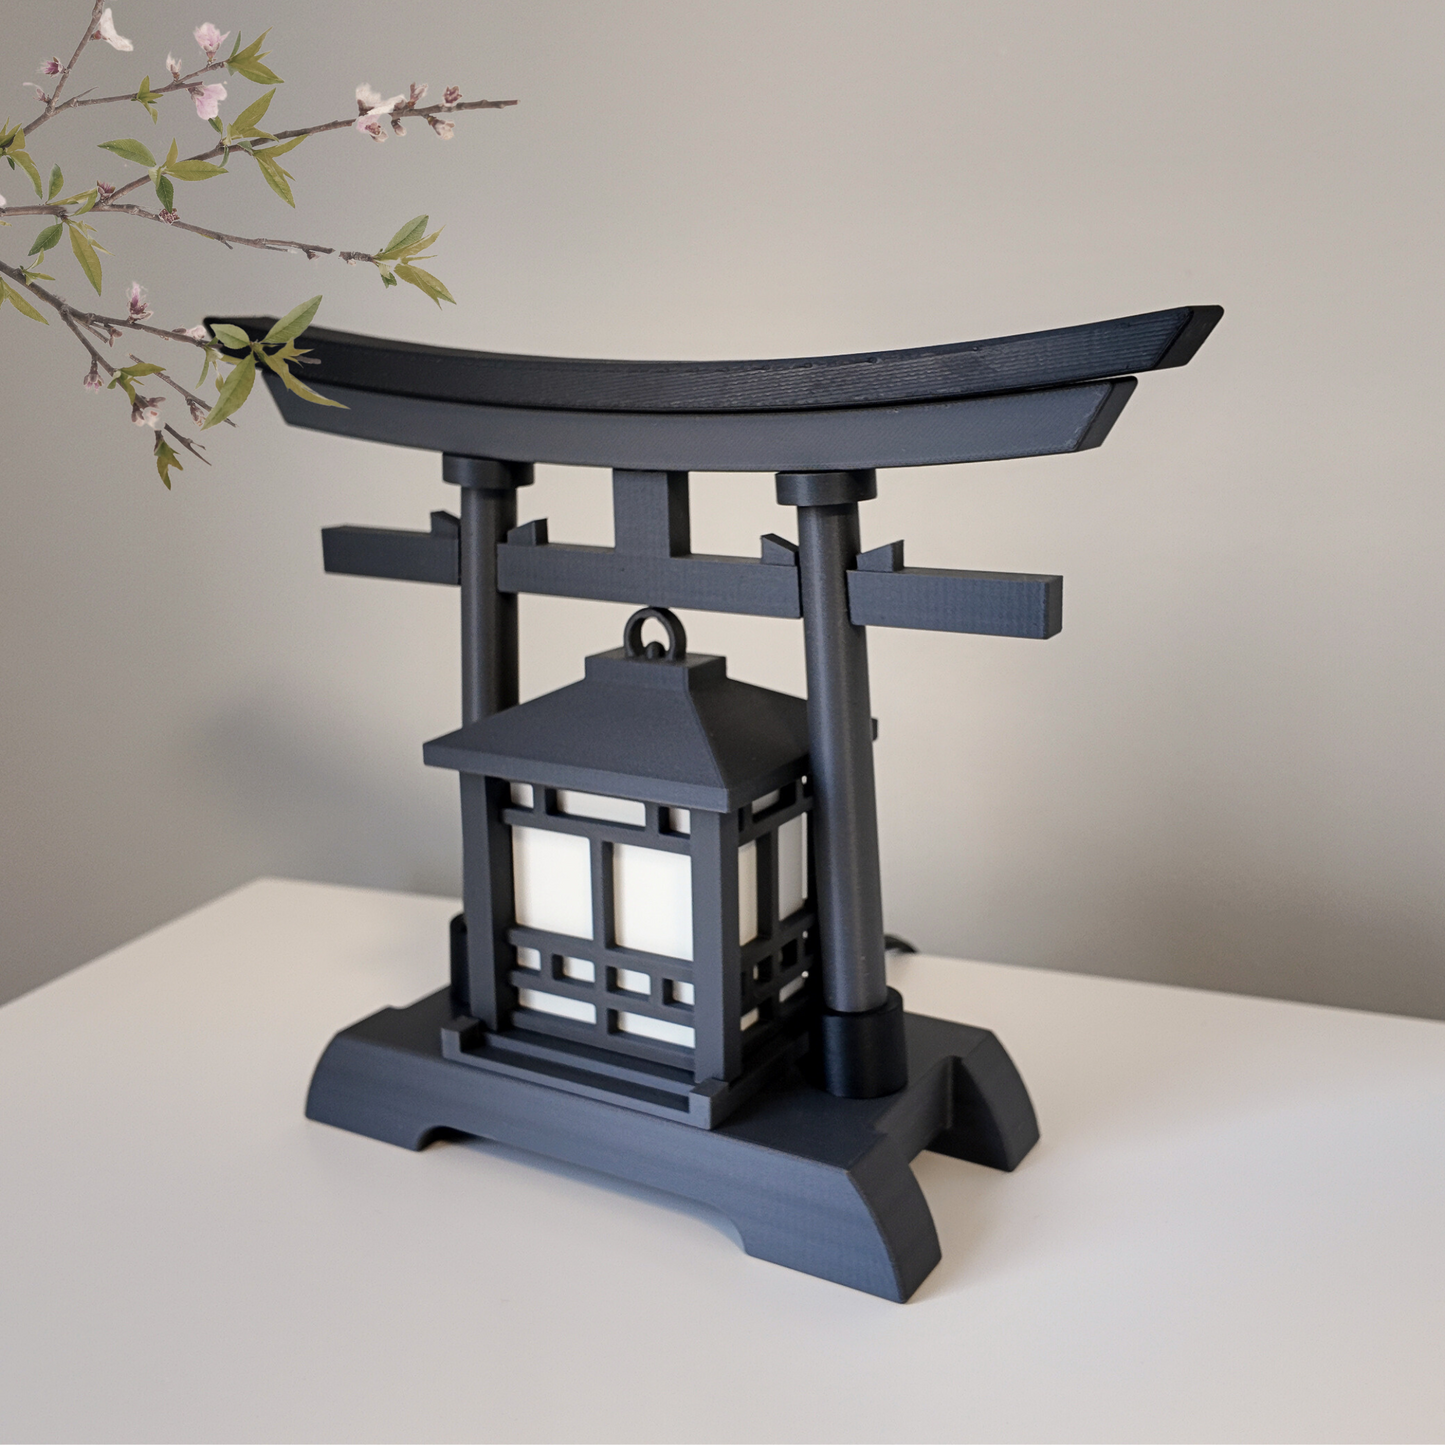 Japanese Torii Gate Lantern - Exquisite Japanese Decor for Home and Room | Unique Desk Lamp and Table Lamp Design | Mini Japanese Lantern Transforms Any Space